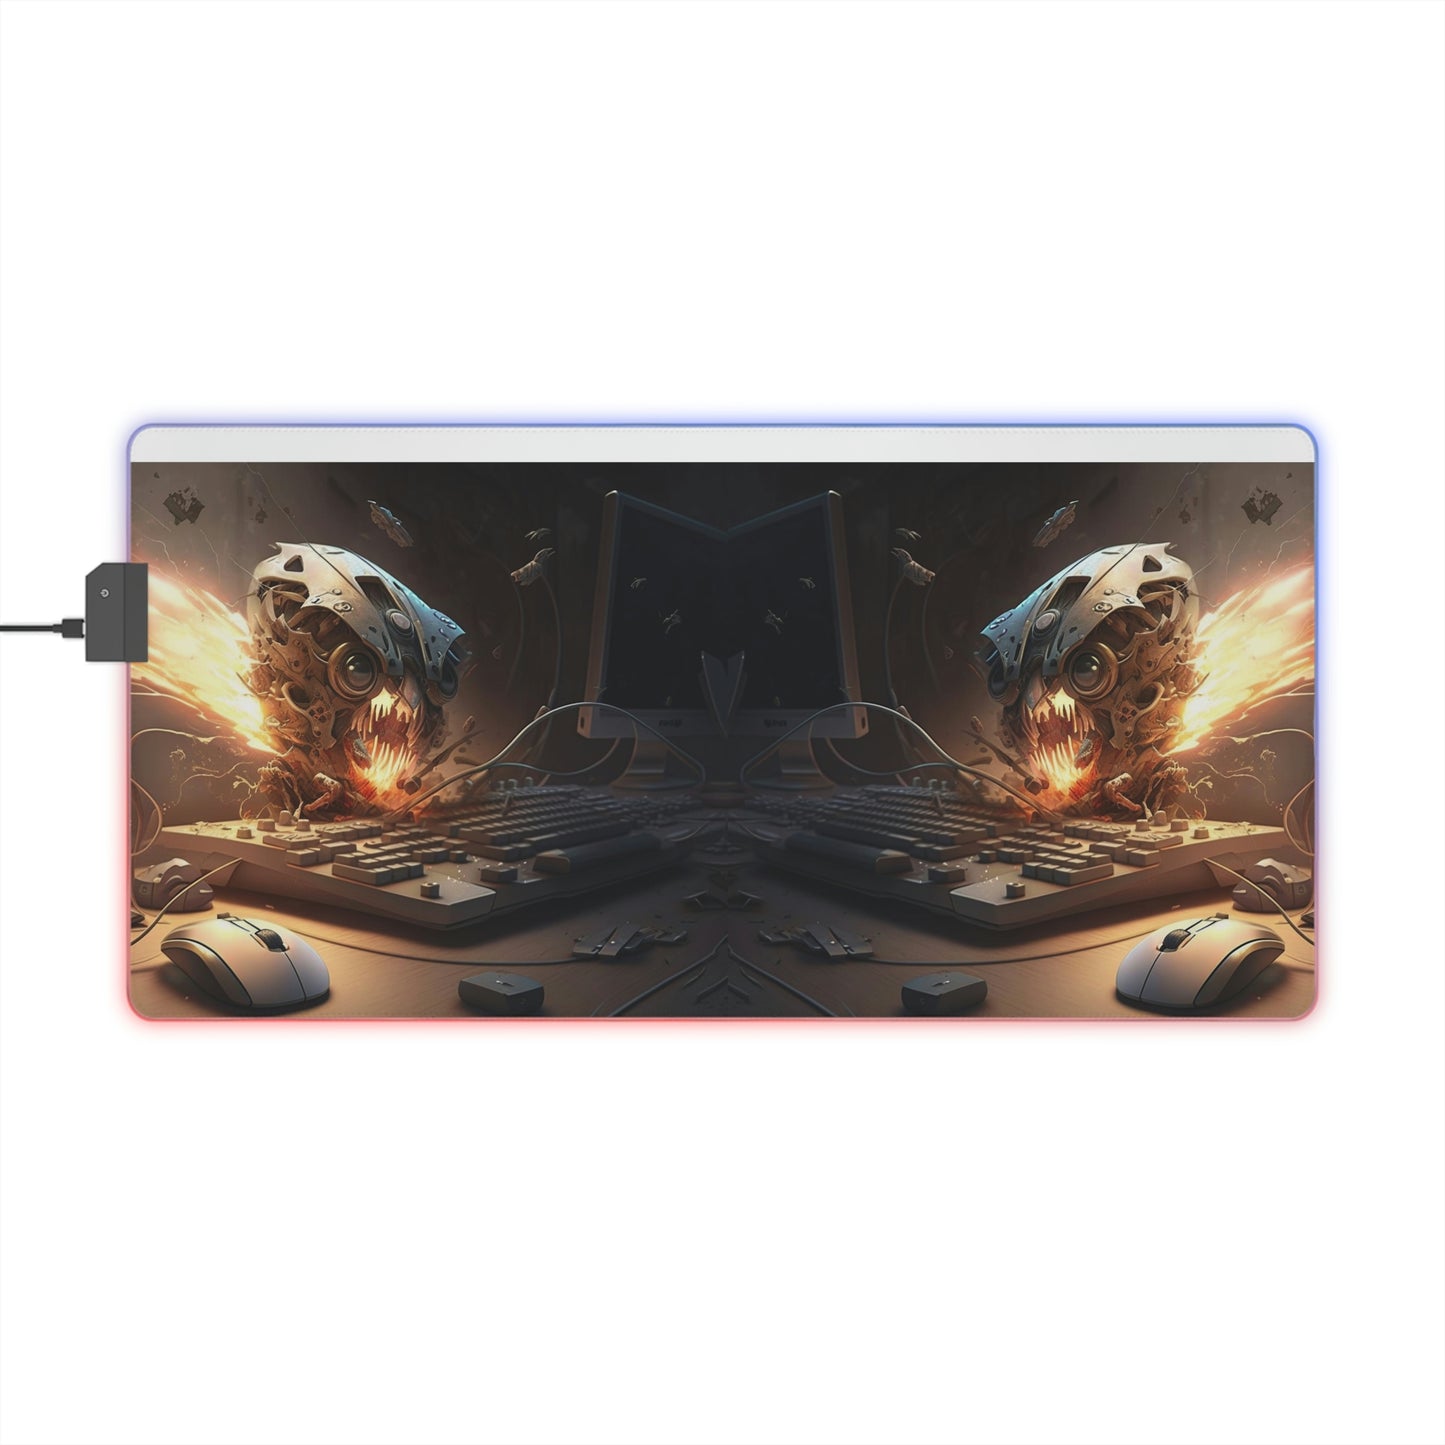 LED Gaming Mouse Pad Mouse Attack 1